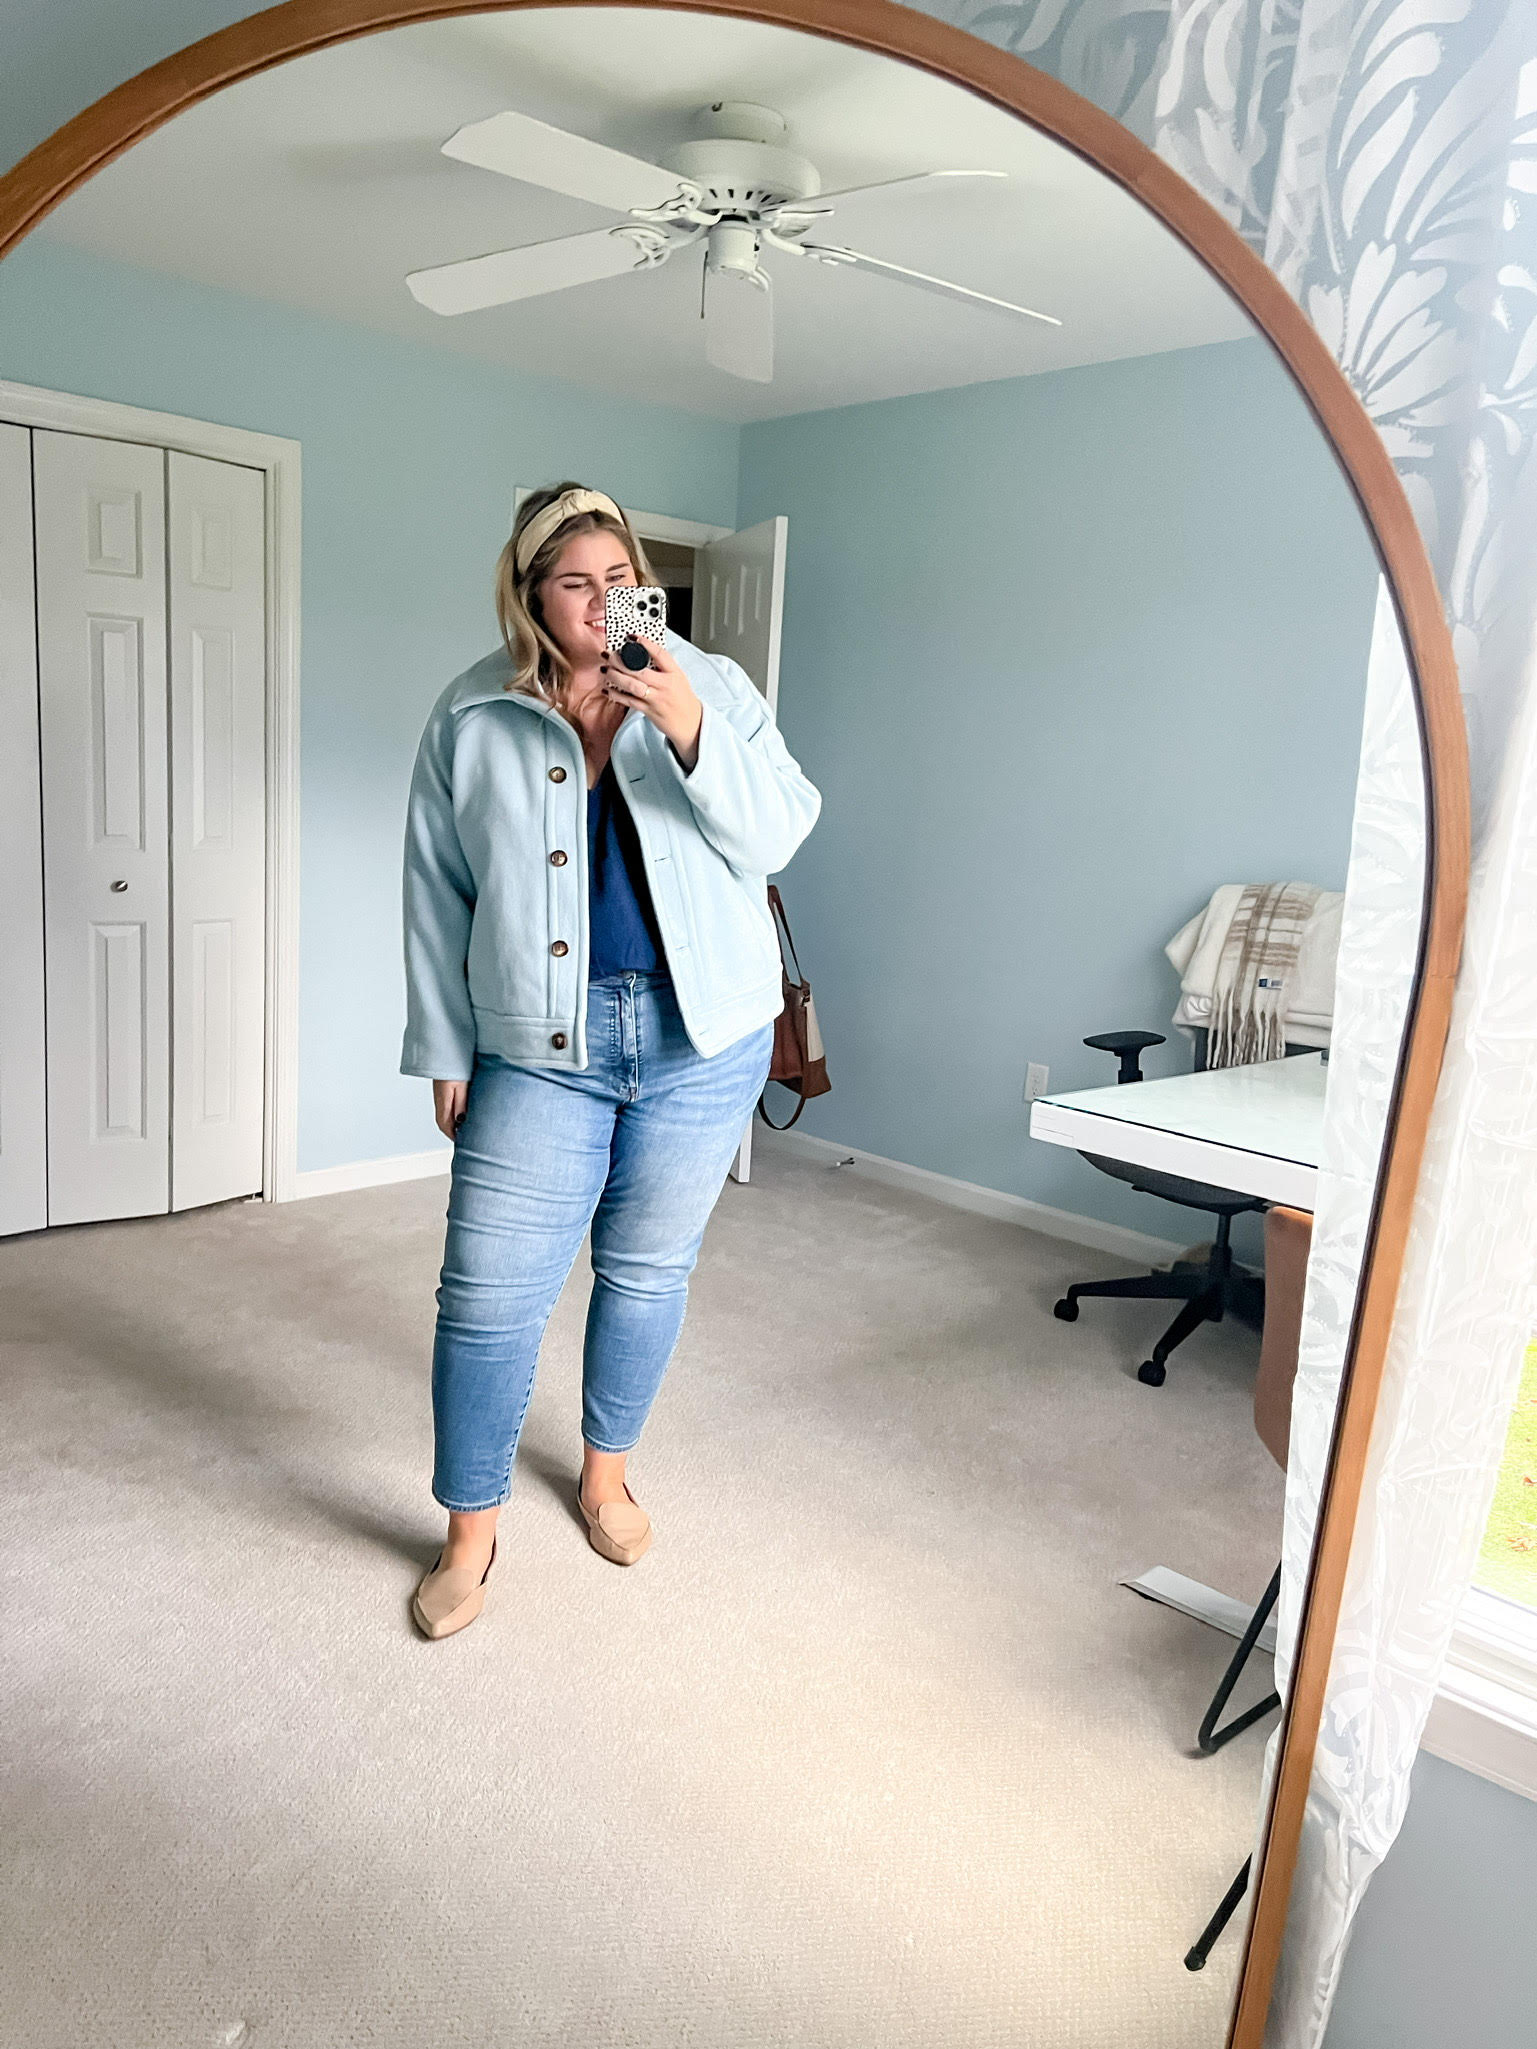 a happy blonde woman taking a mirror selfie wearing a blue coat, teal top, jeans and tan loafers